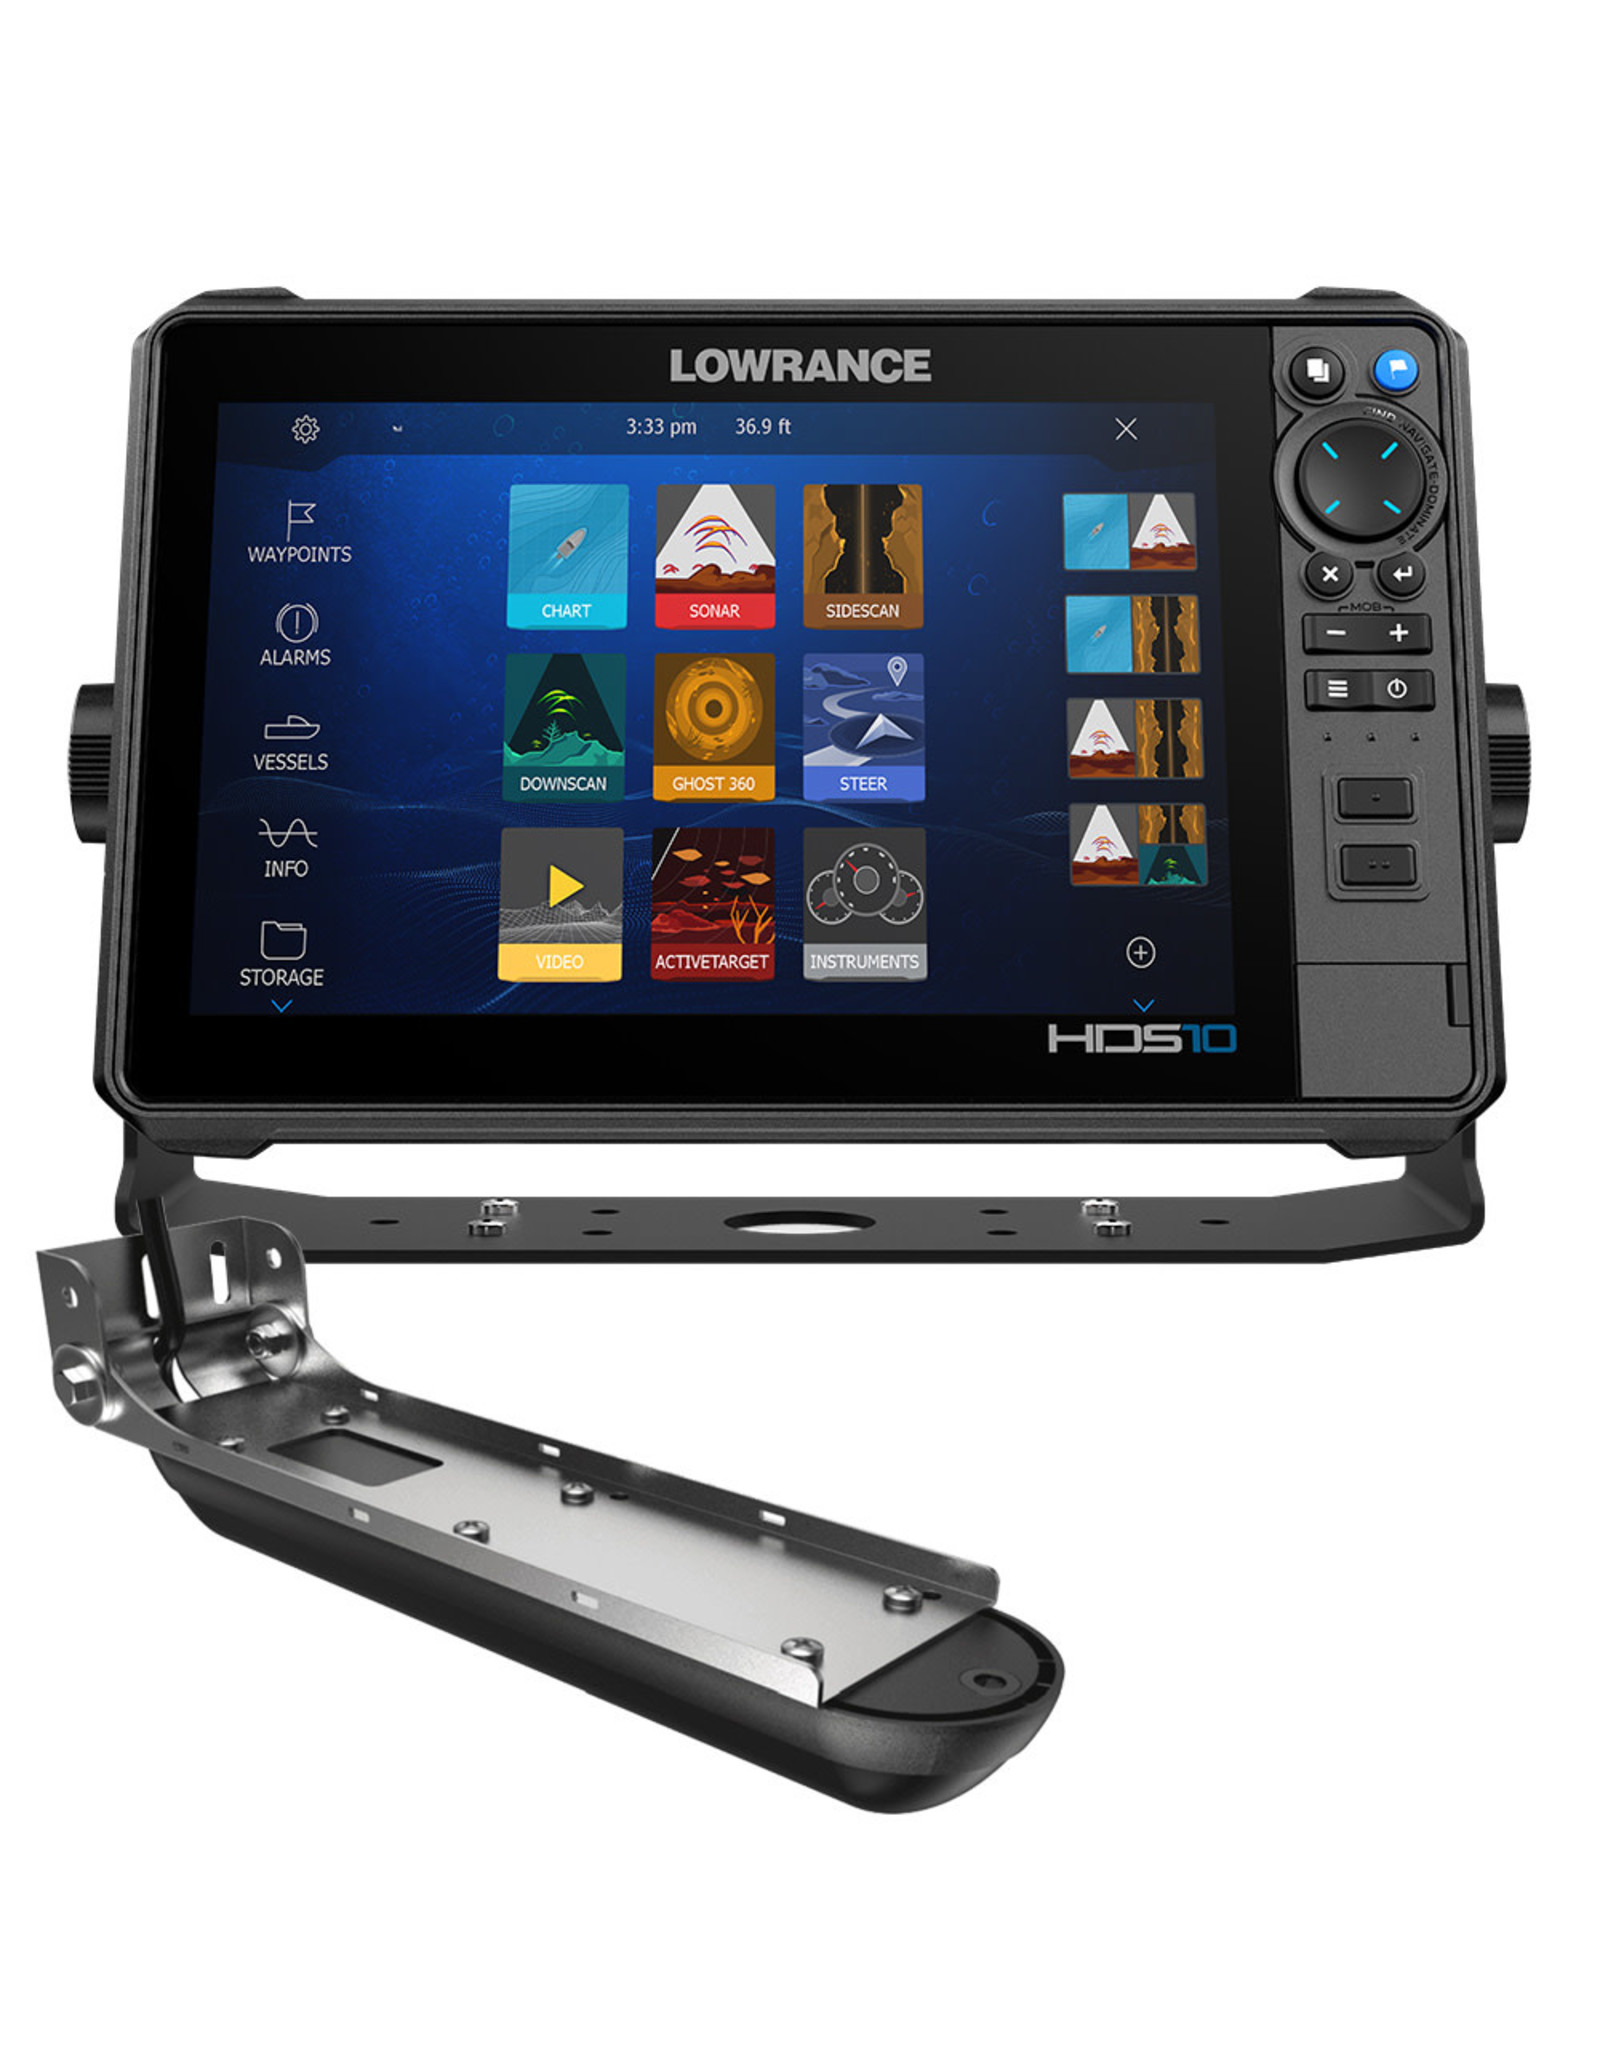 HDS PRO 10 with C-MAP DISCOVER OnBoard Active Imaging HD - DJS MARINE ELECTRONICS LLC